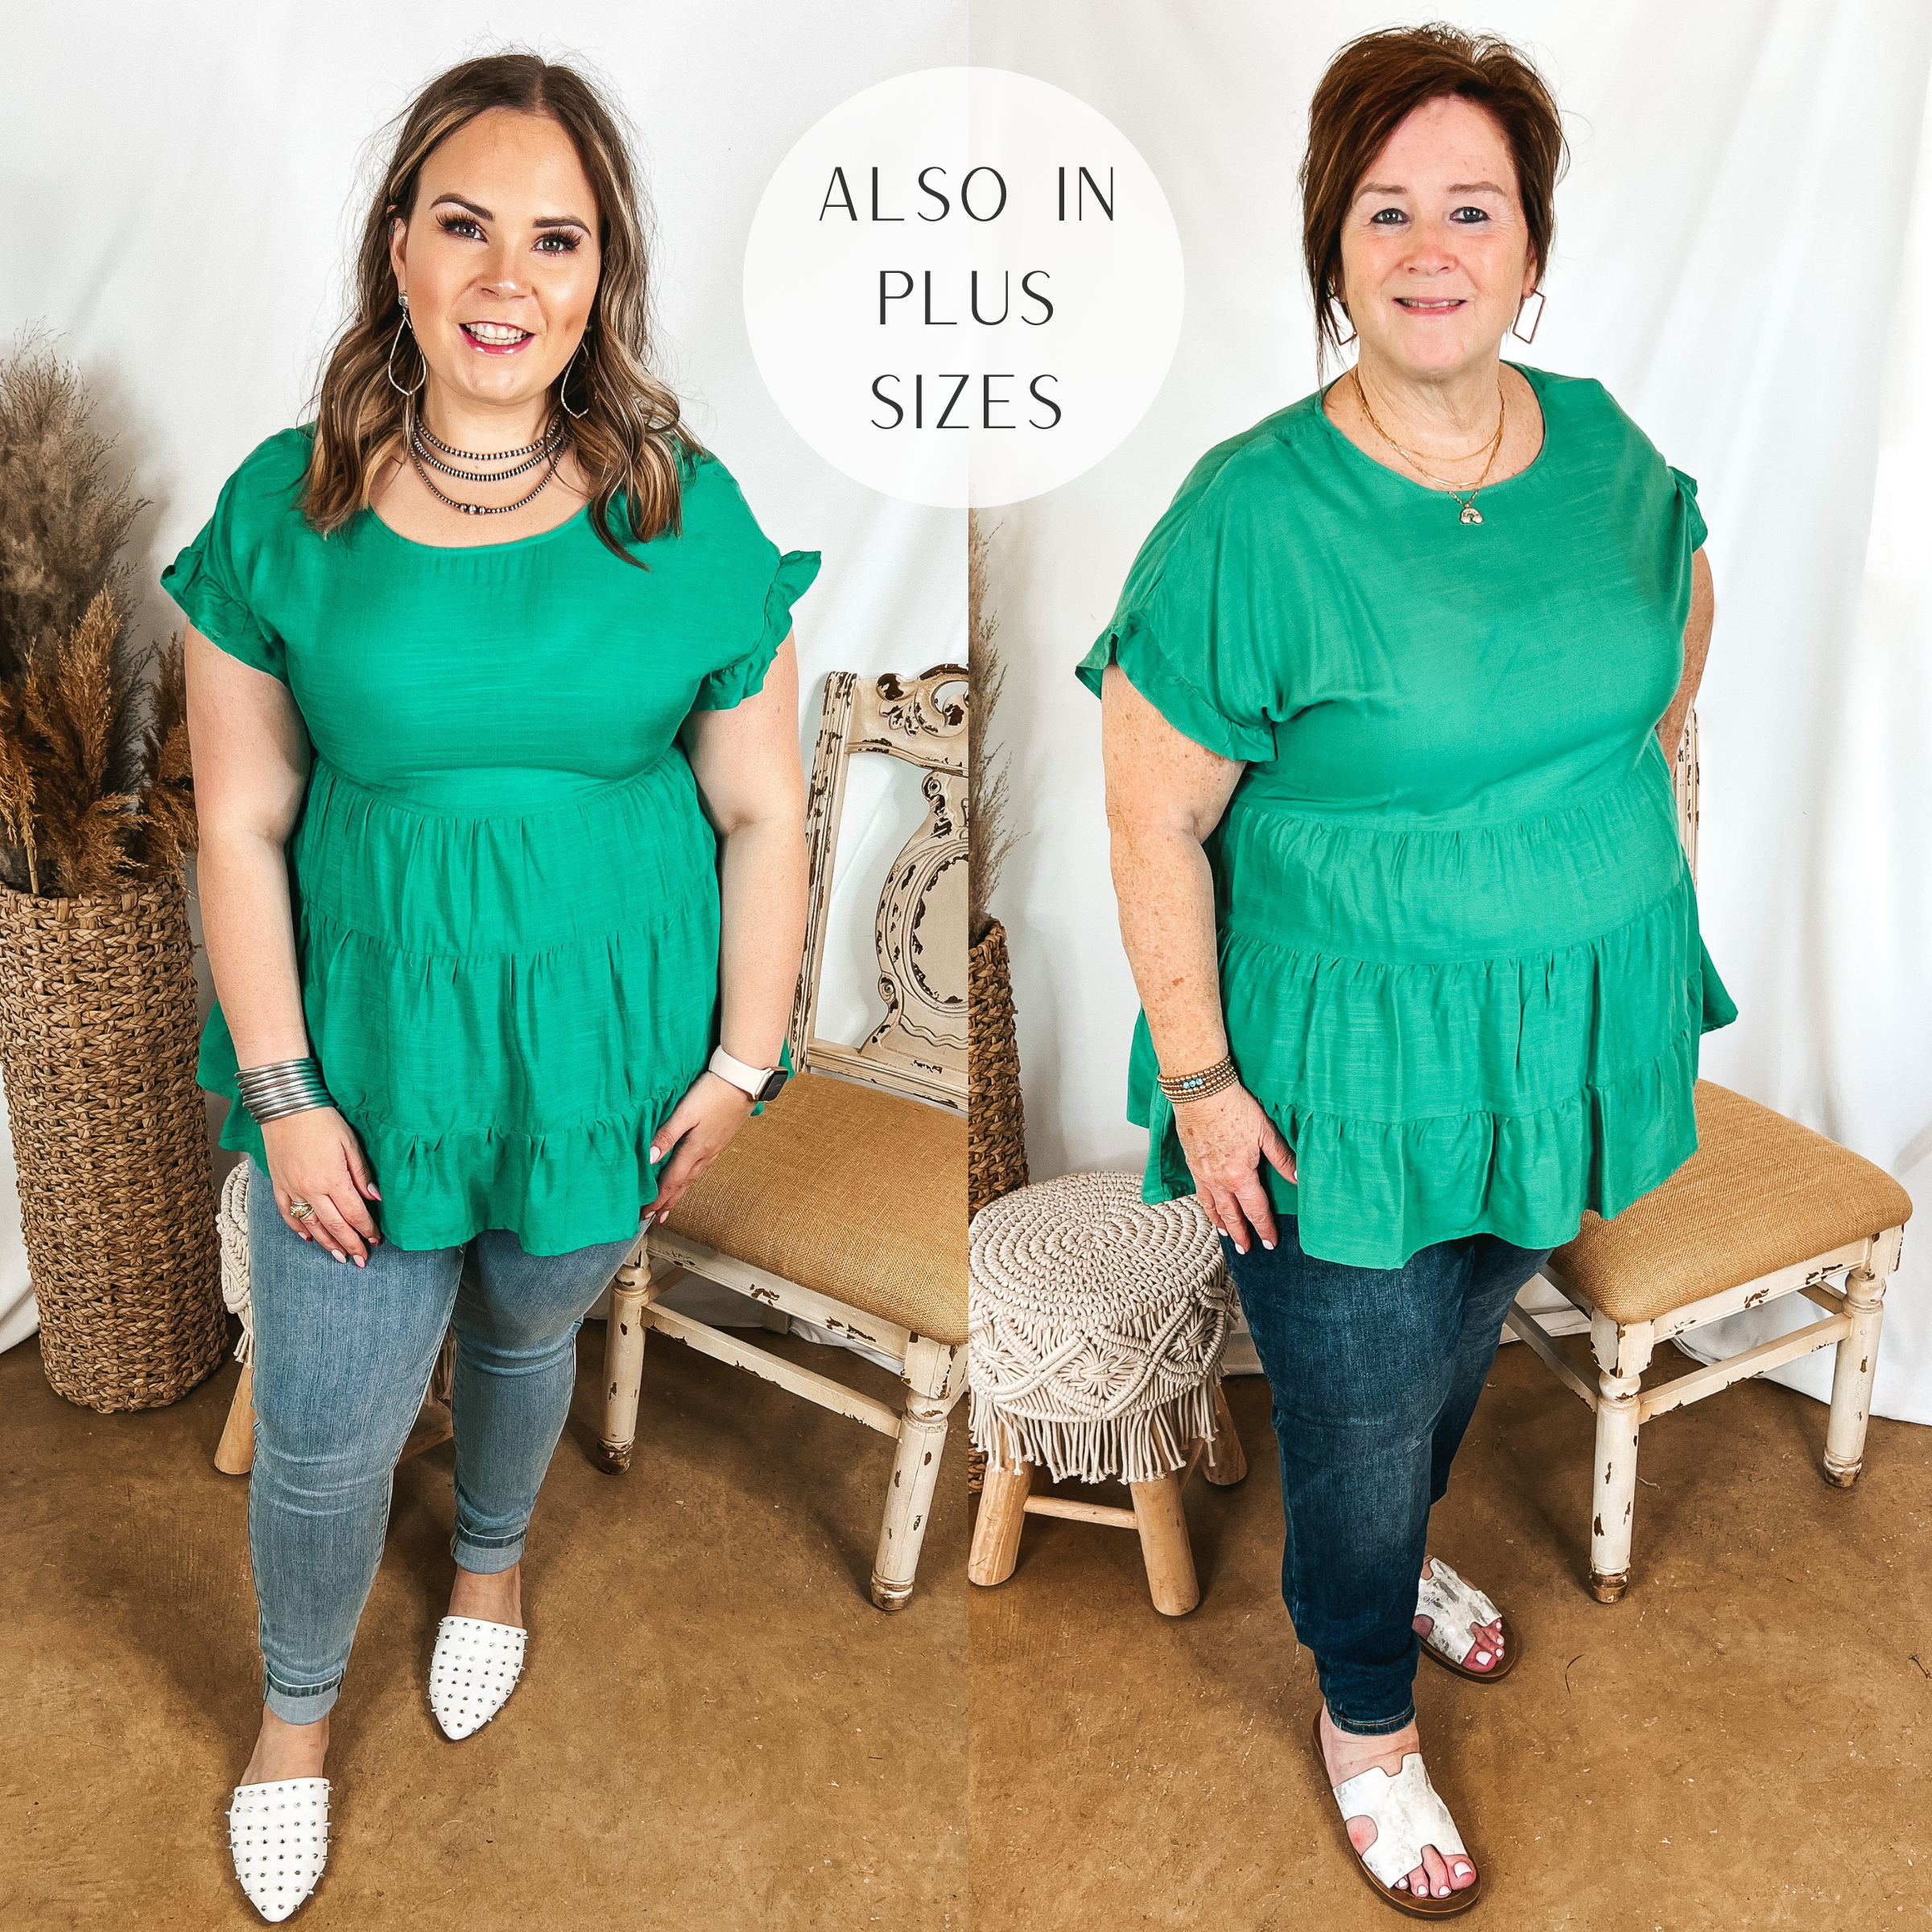 Models are wearing a green ruffle tiered top. Size large model has it paired with light wash skinny jeans, white mules, and silver jewelry. Plus size model has it paired with white sandals, dark wash skinny jeans, and gold jewelry.